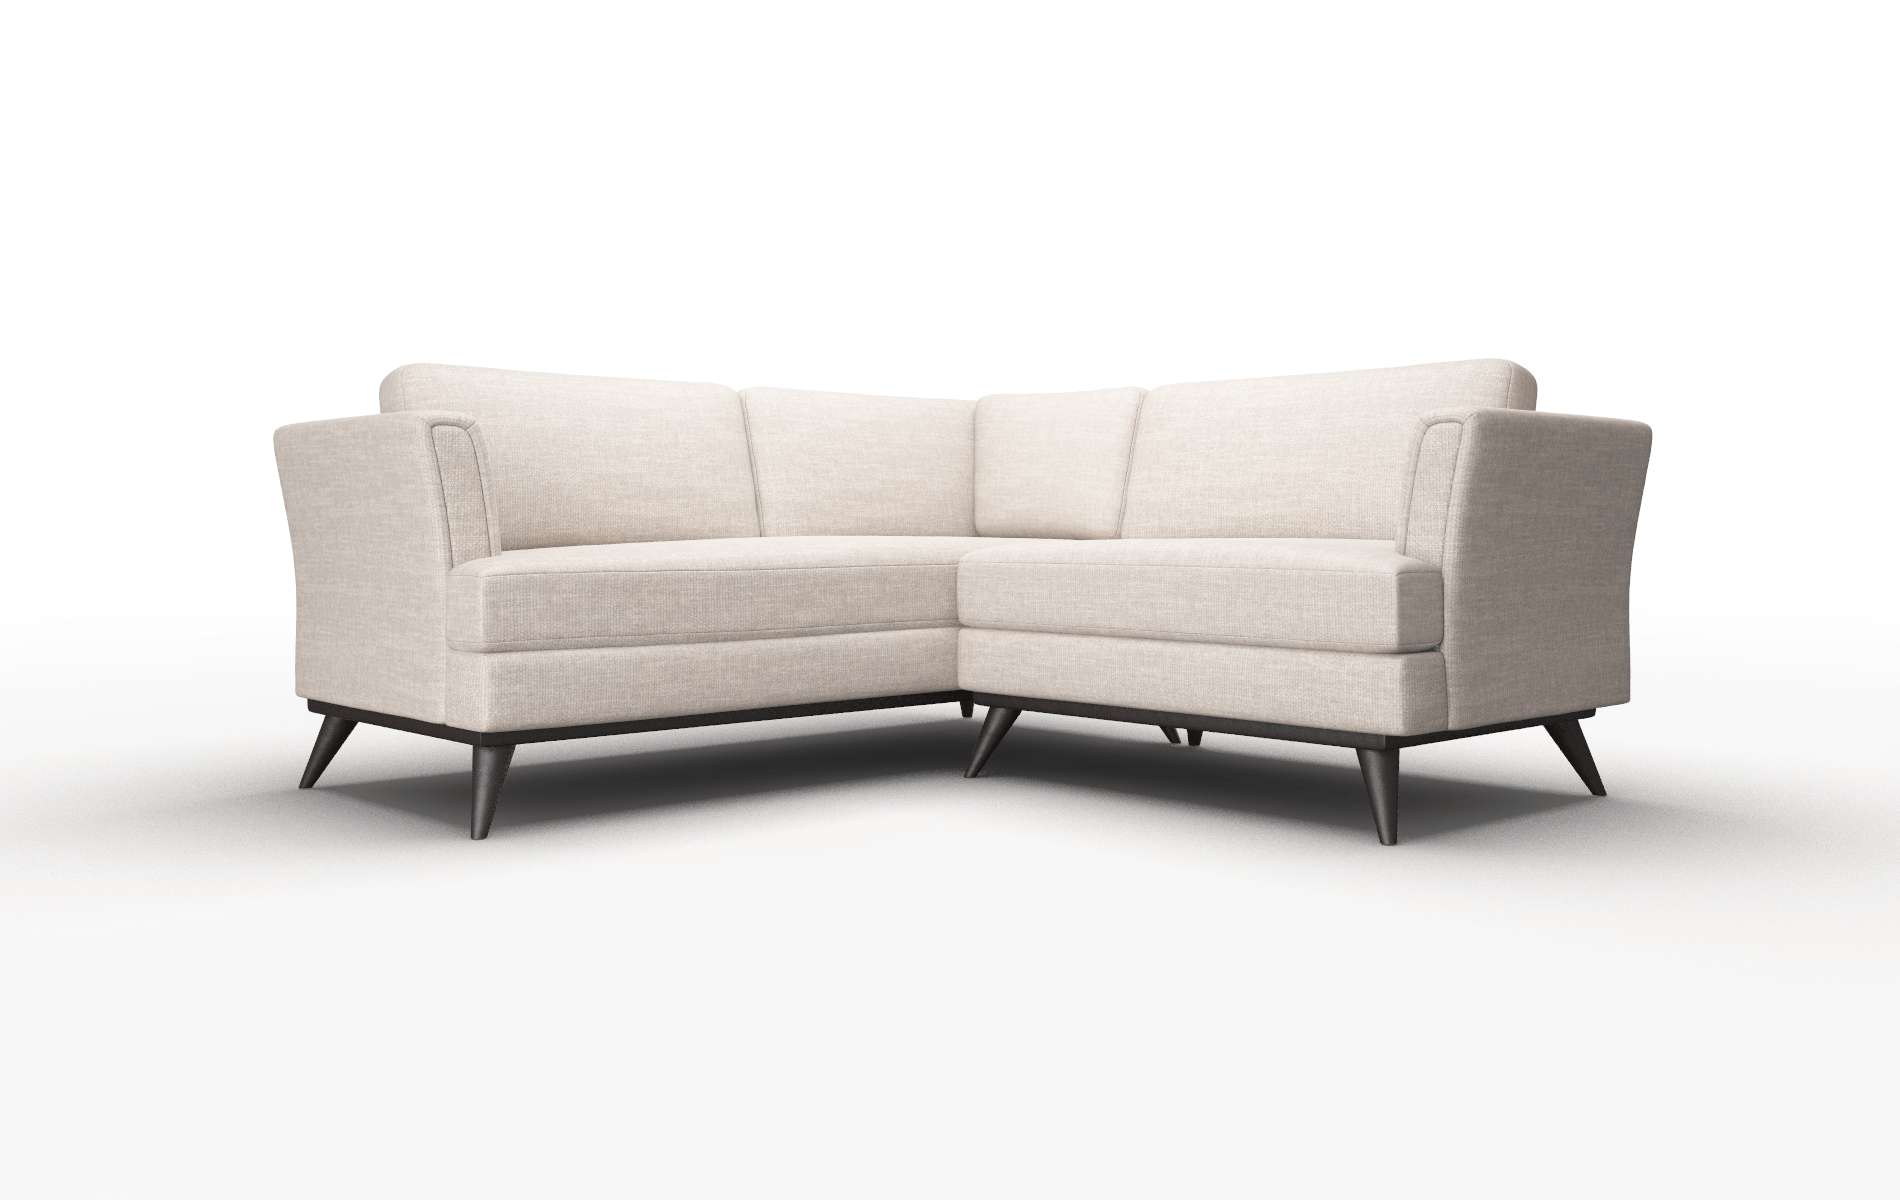 Antalya Clyde Dolphin Sectional espresso legs 1